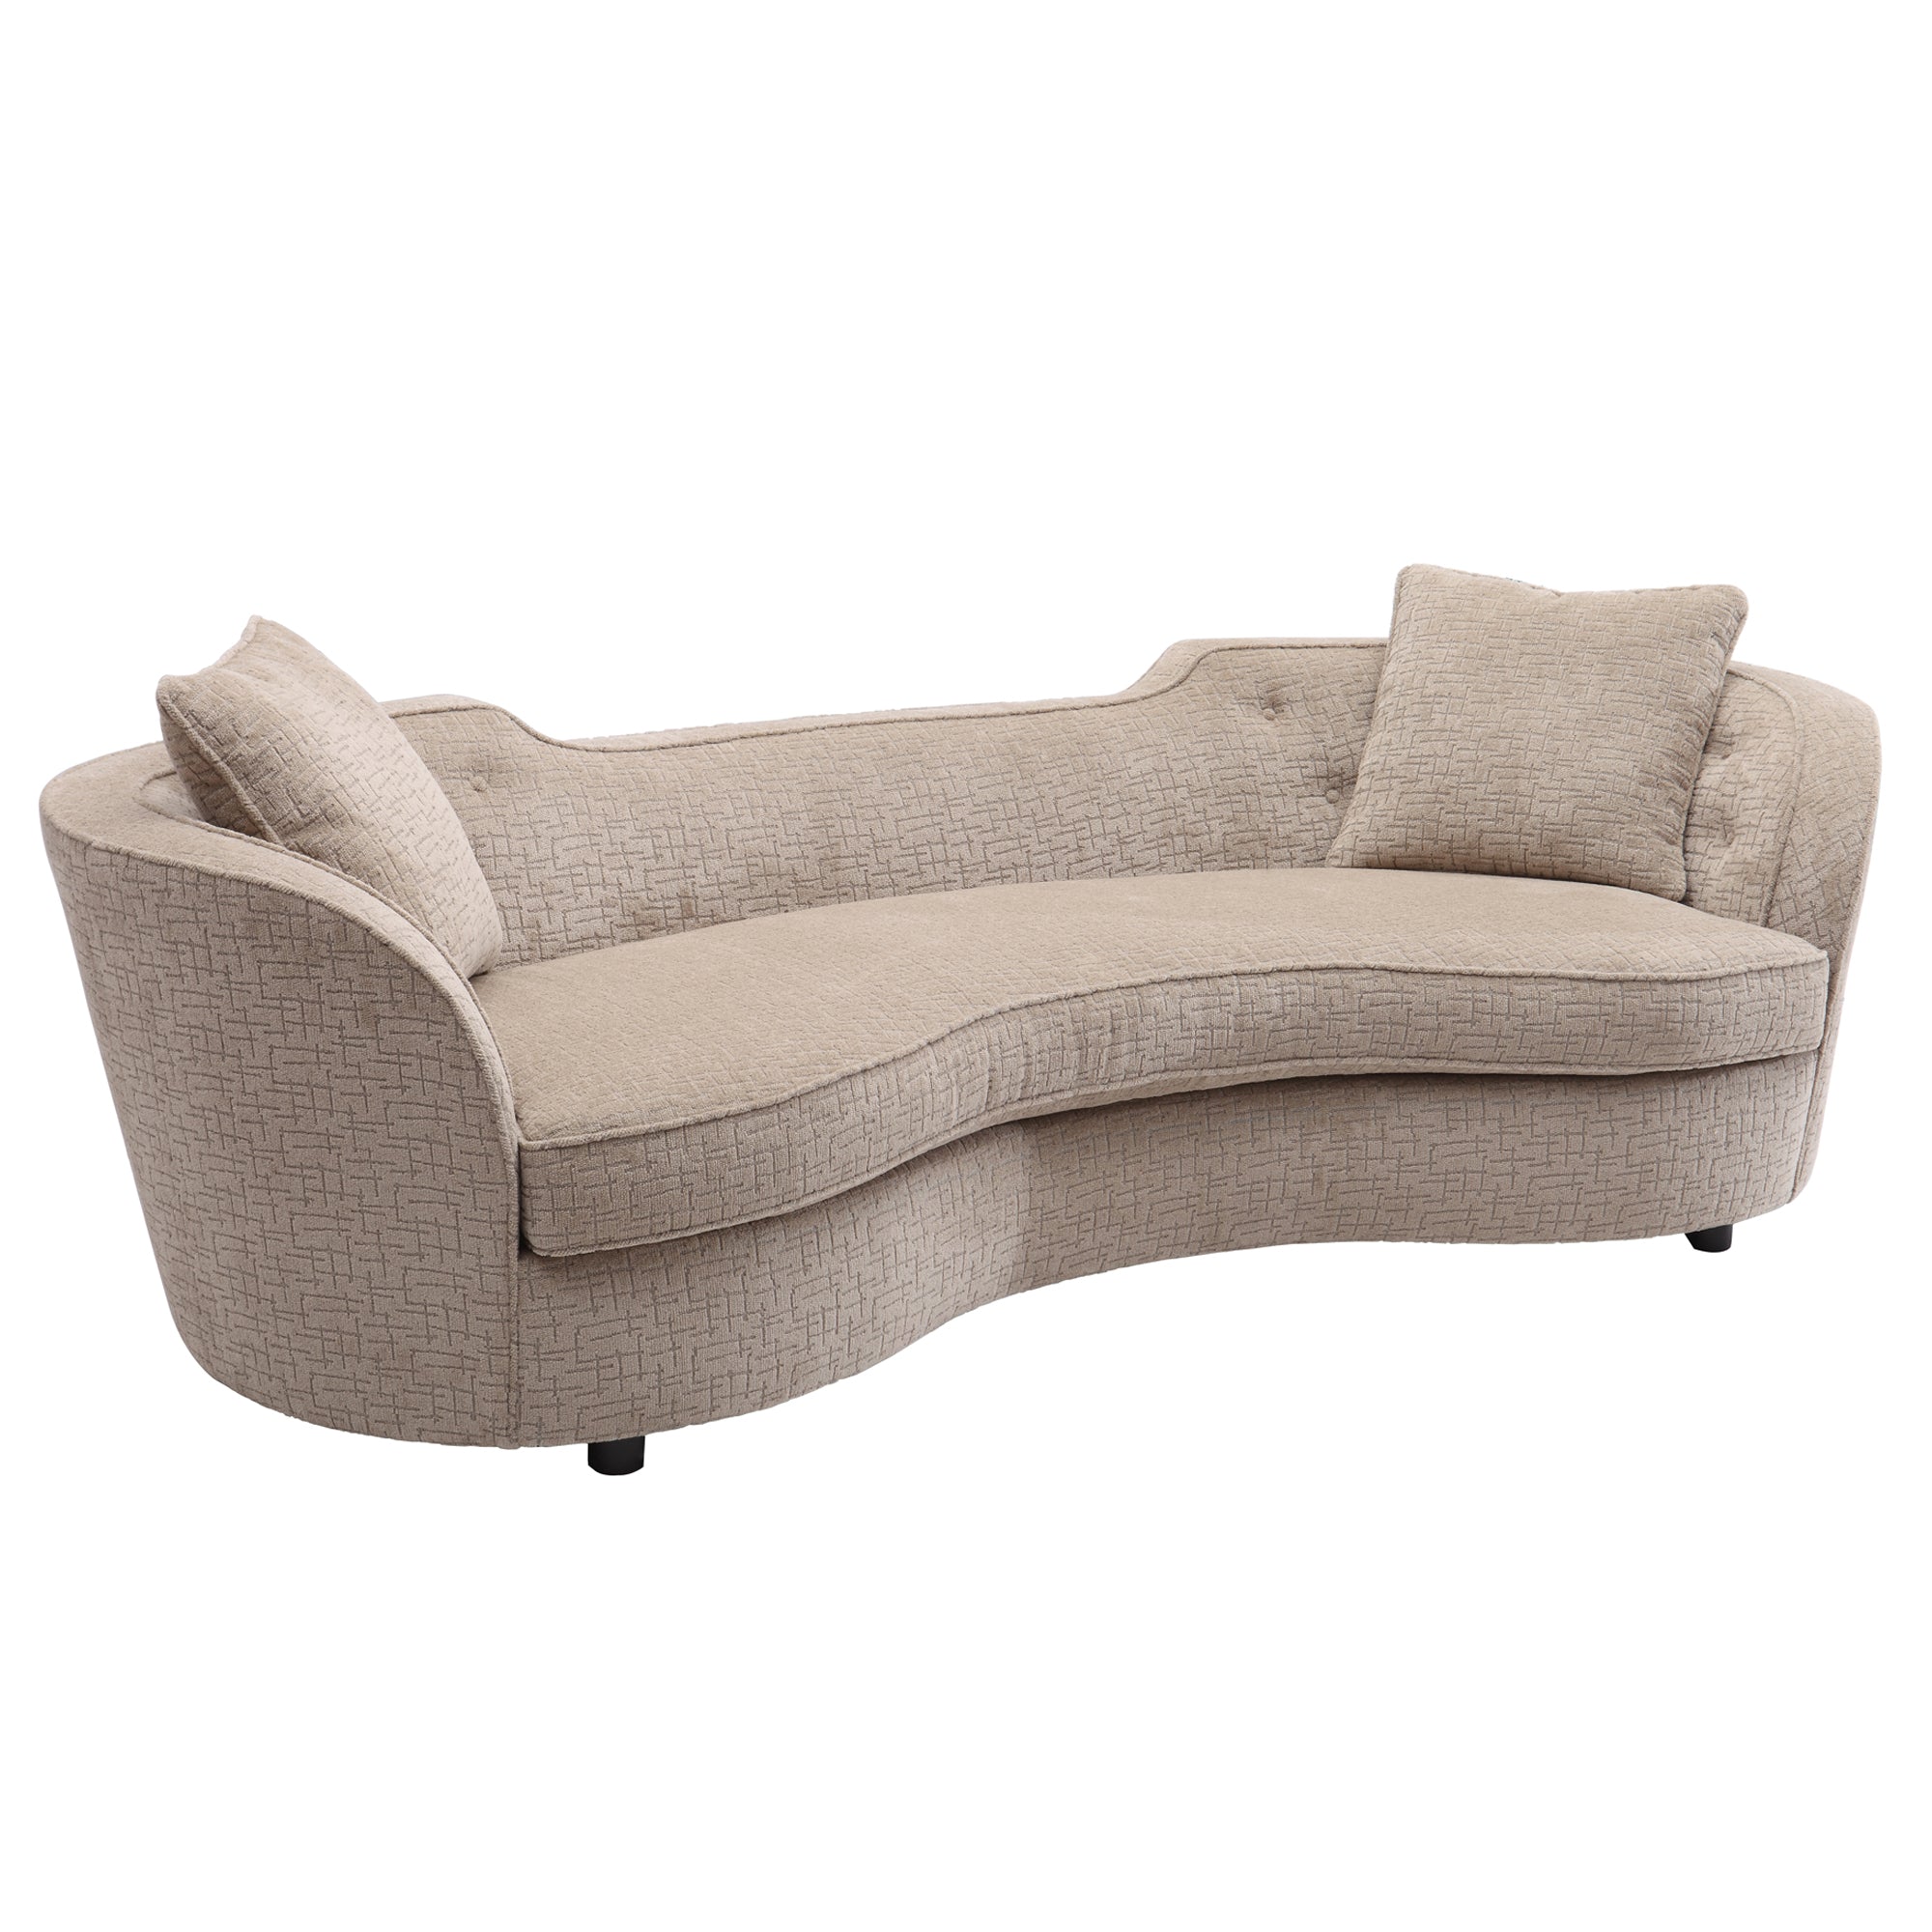 Armen Living Lcpa3sa Palisade Transitional Sofa In Sand Fabric With Brown Legs